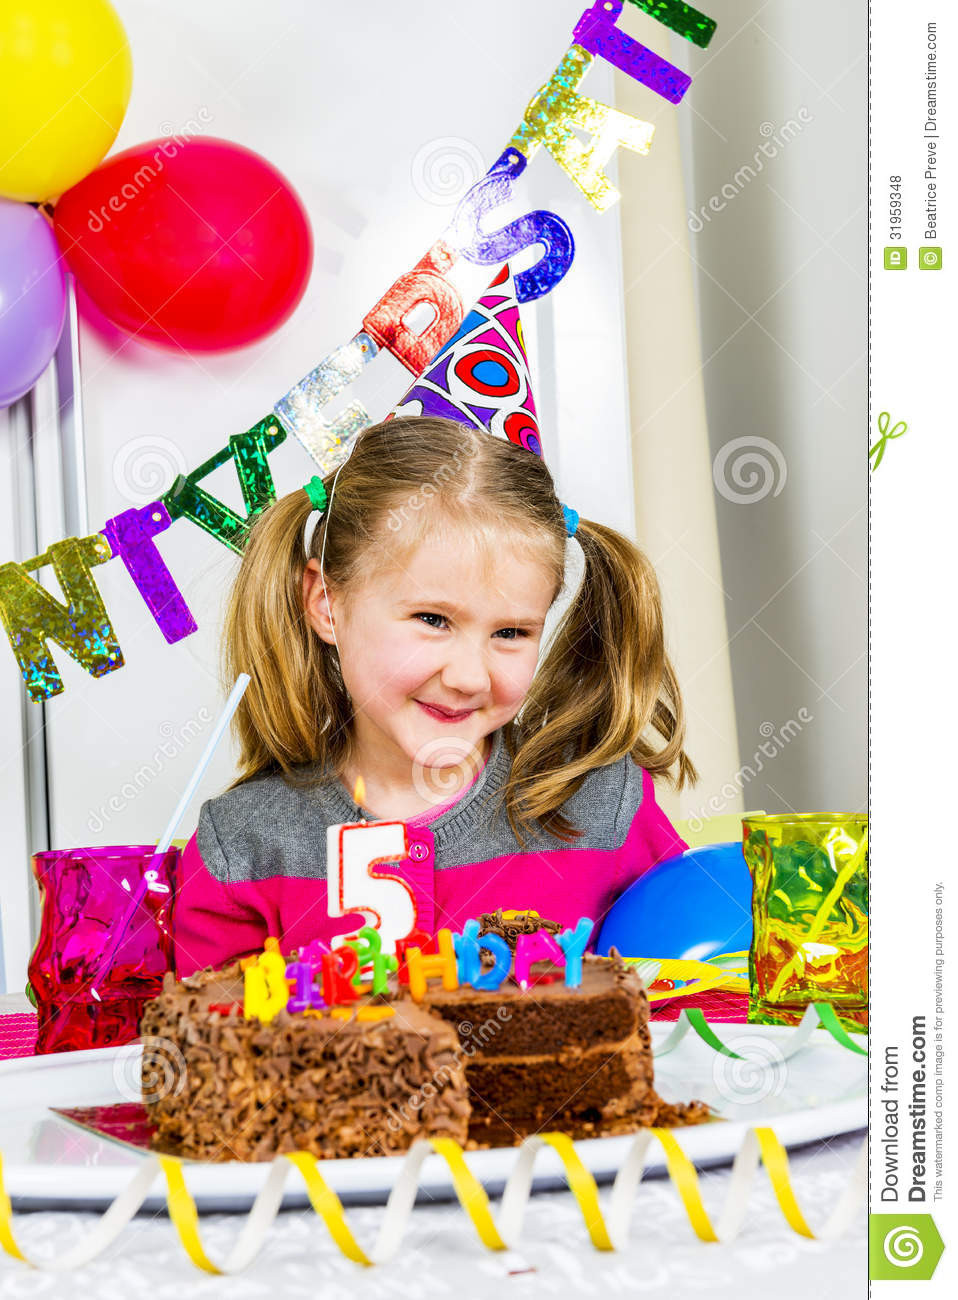 Funny Birthday Party Pictures
 Big funny birthday party stock photo Image of home